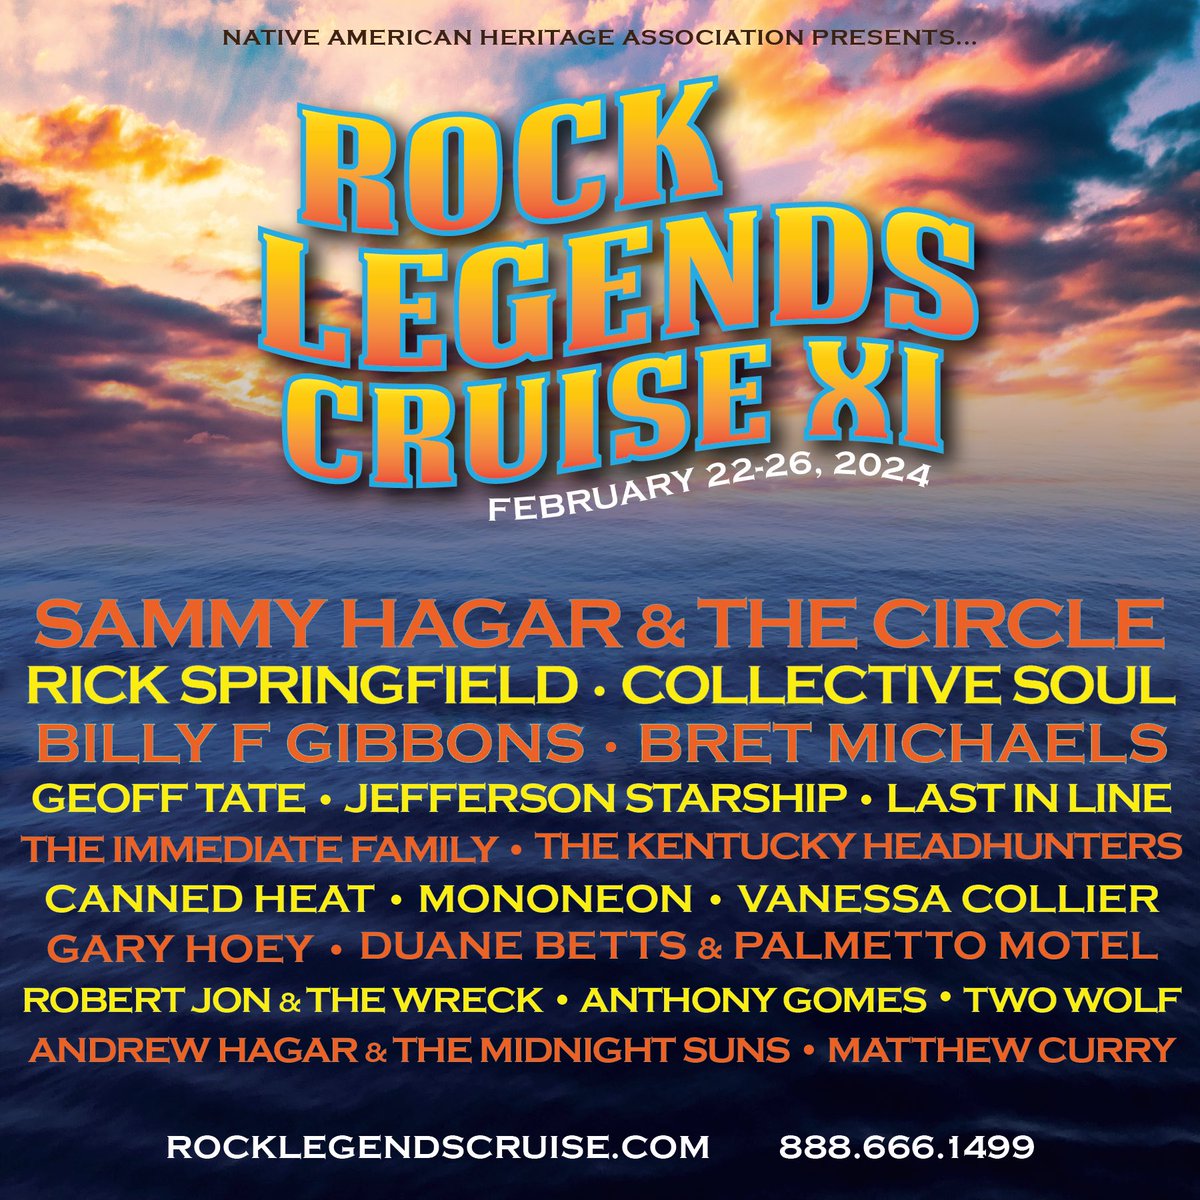 Sail away with Rick Springfield, Sammy Hagar & The Circle and more on the Rock Legends Cruise XI! Mark your calendars for February 22-26, 2024 as the rock festival cruises from Miami to Puerto Plata! Tickets and more info at rocklegendscruise.com